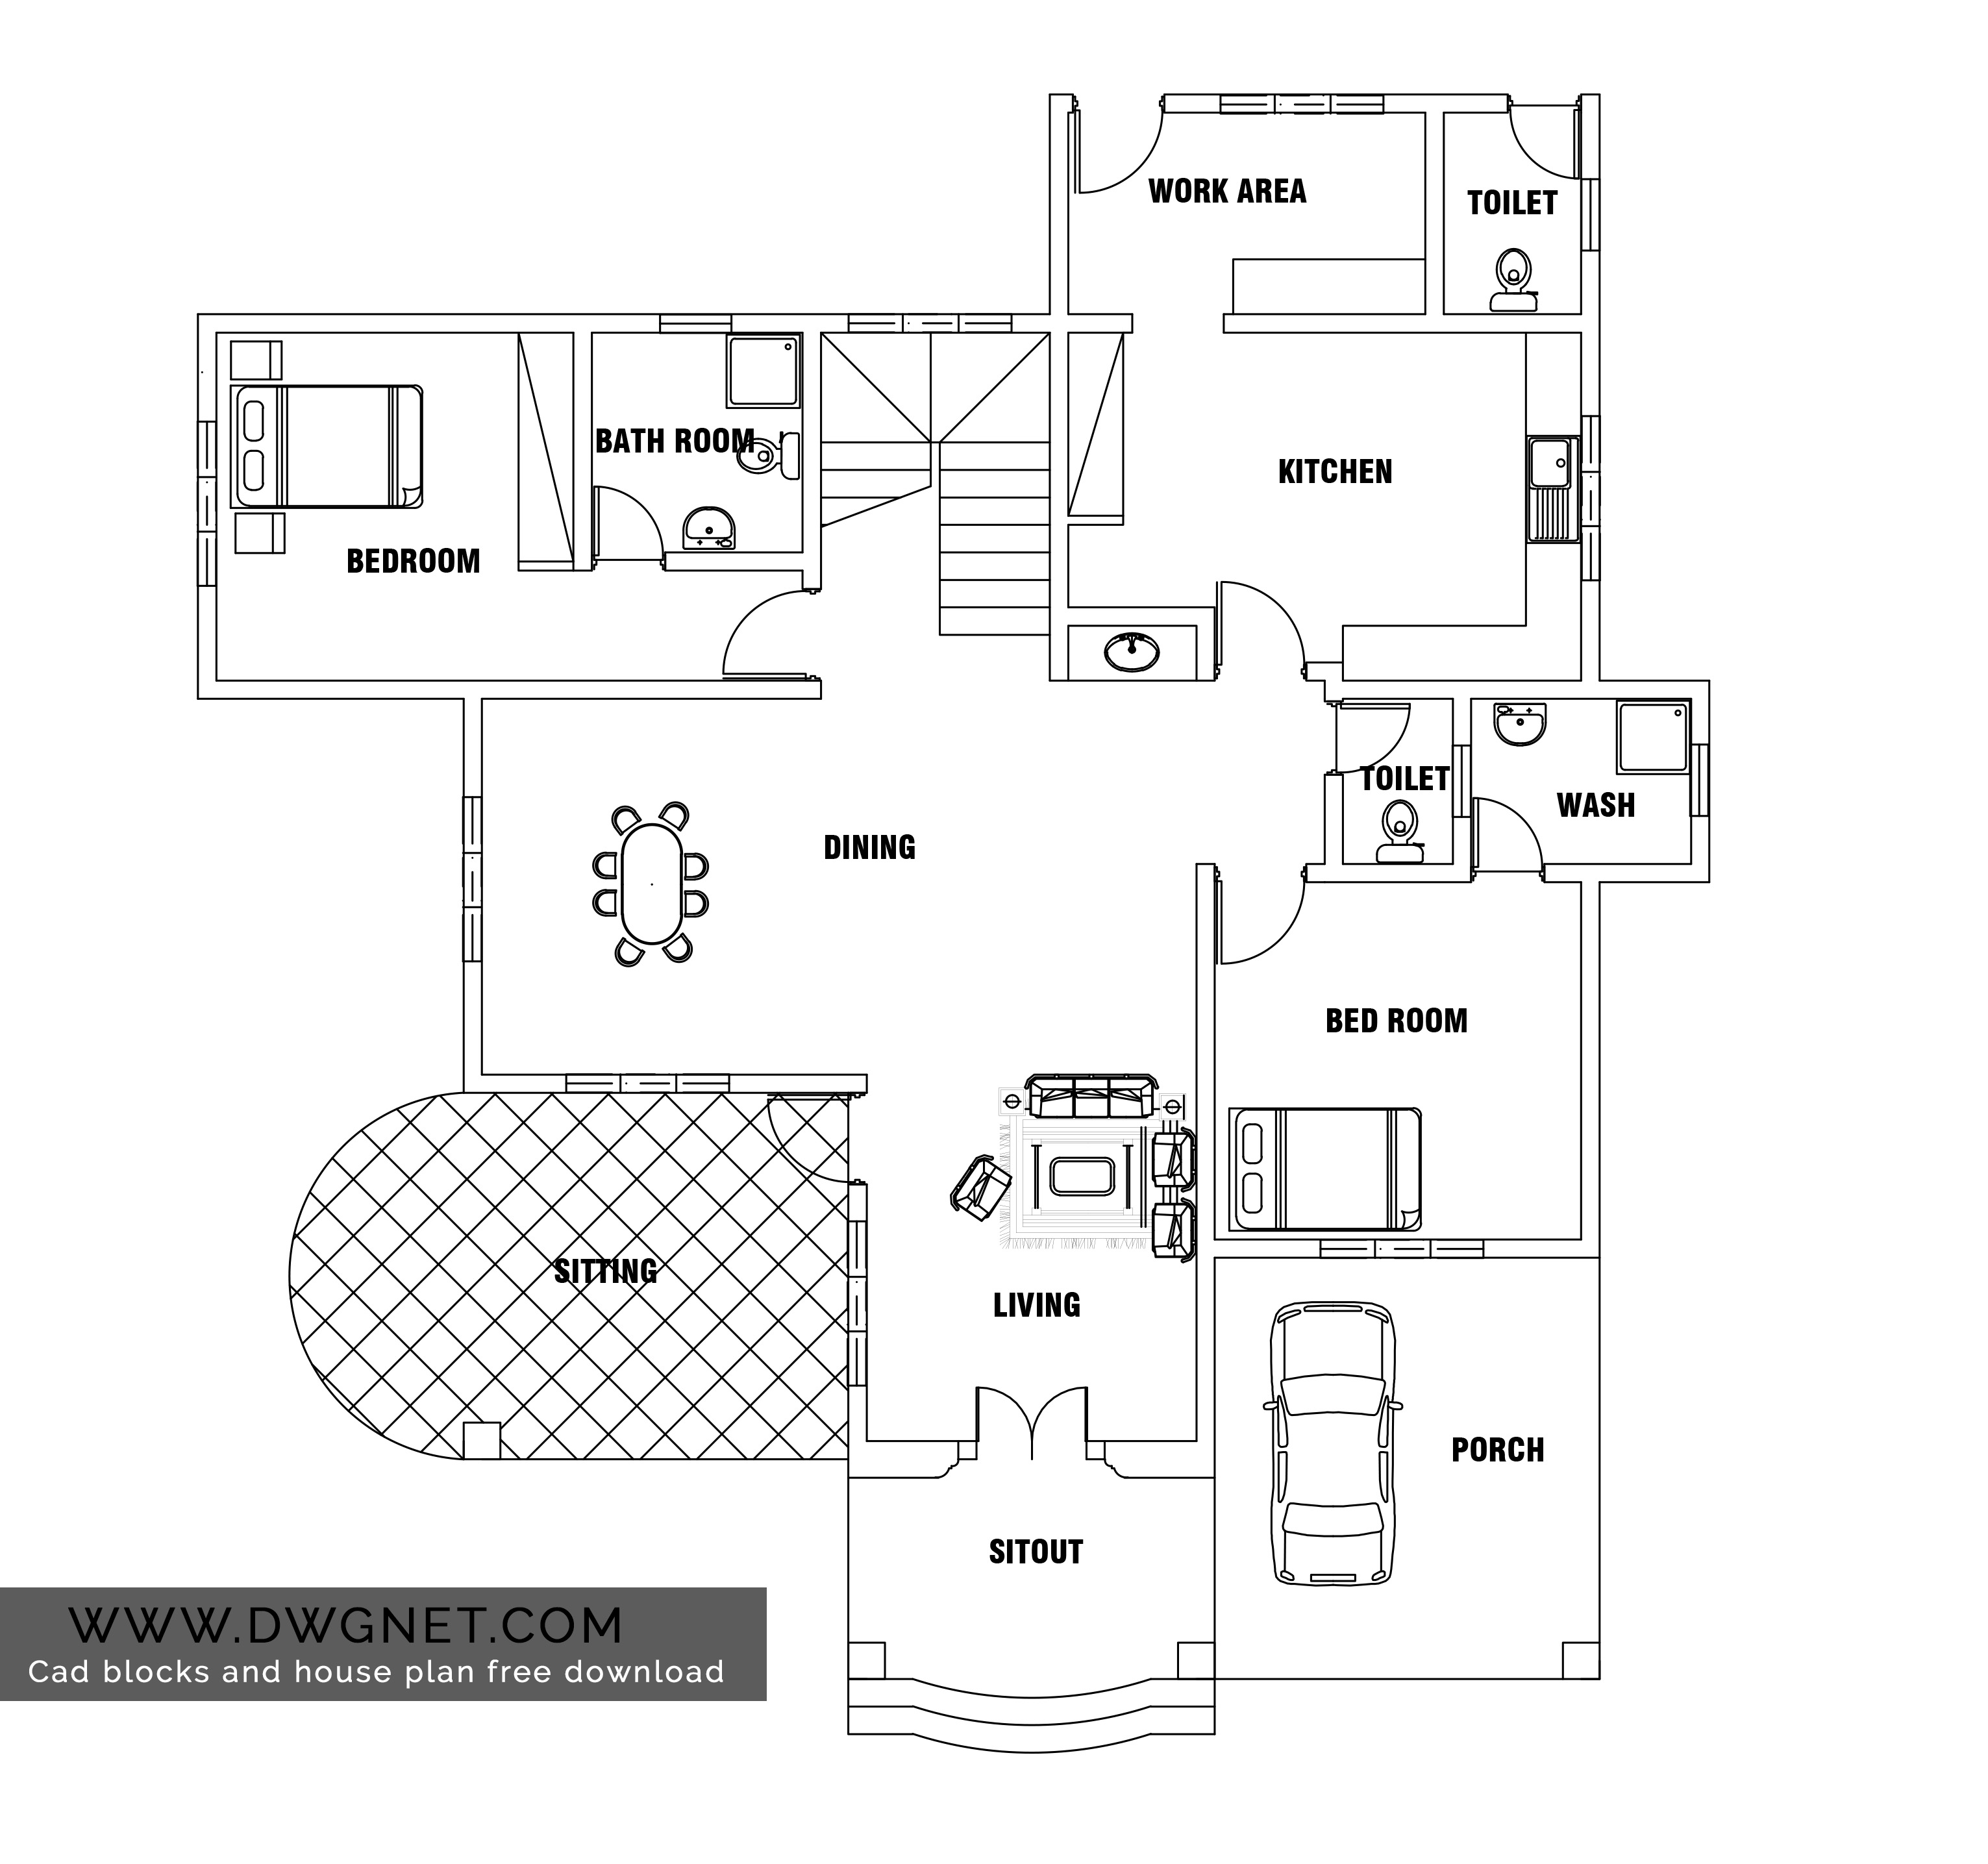 Free Cad File House Plans - corpsfasr